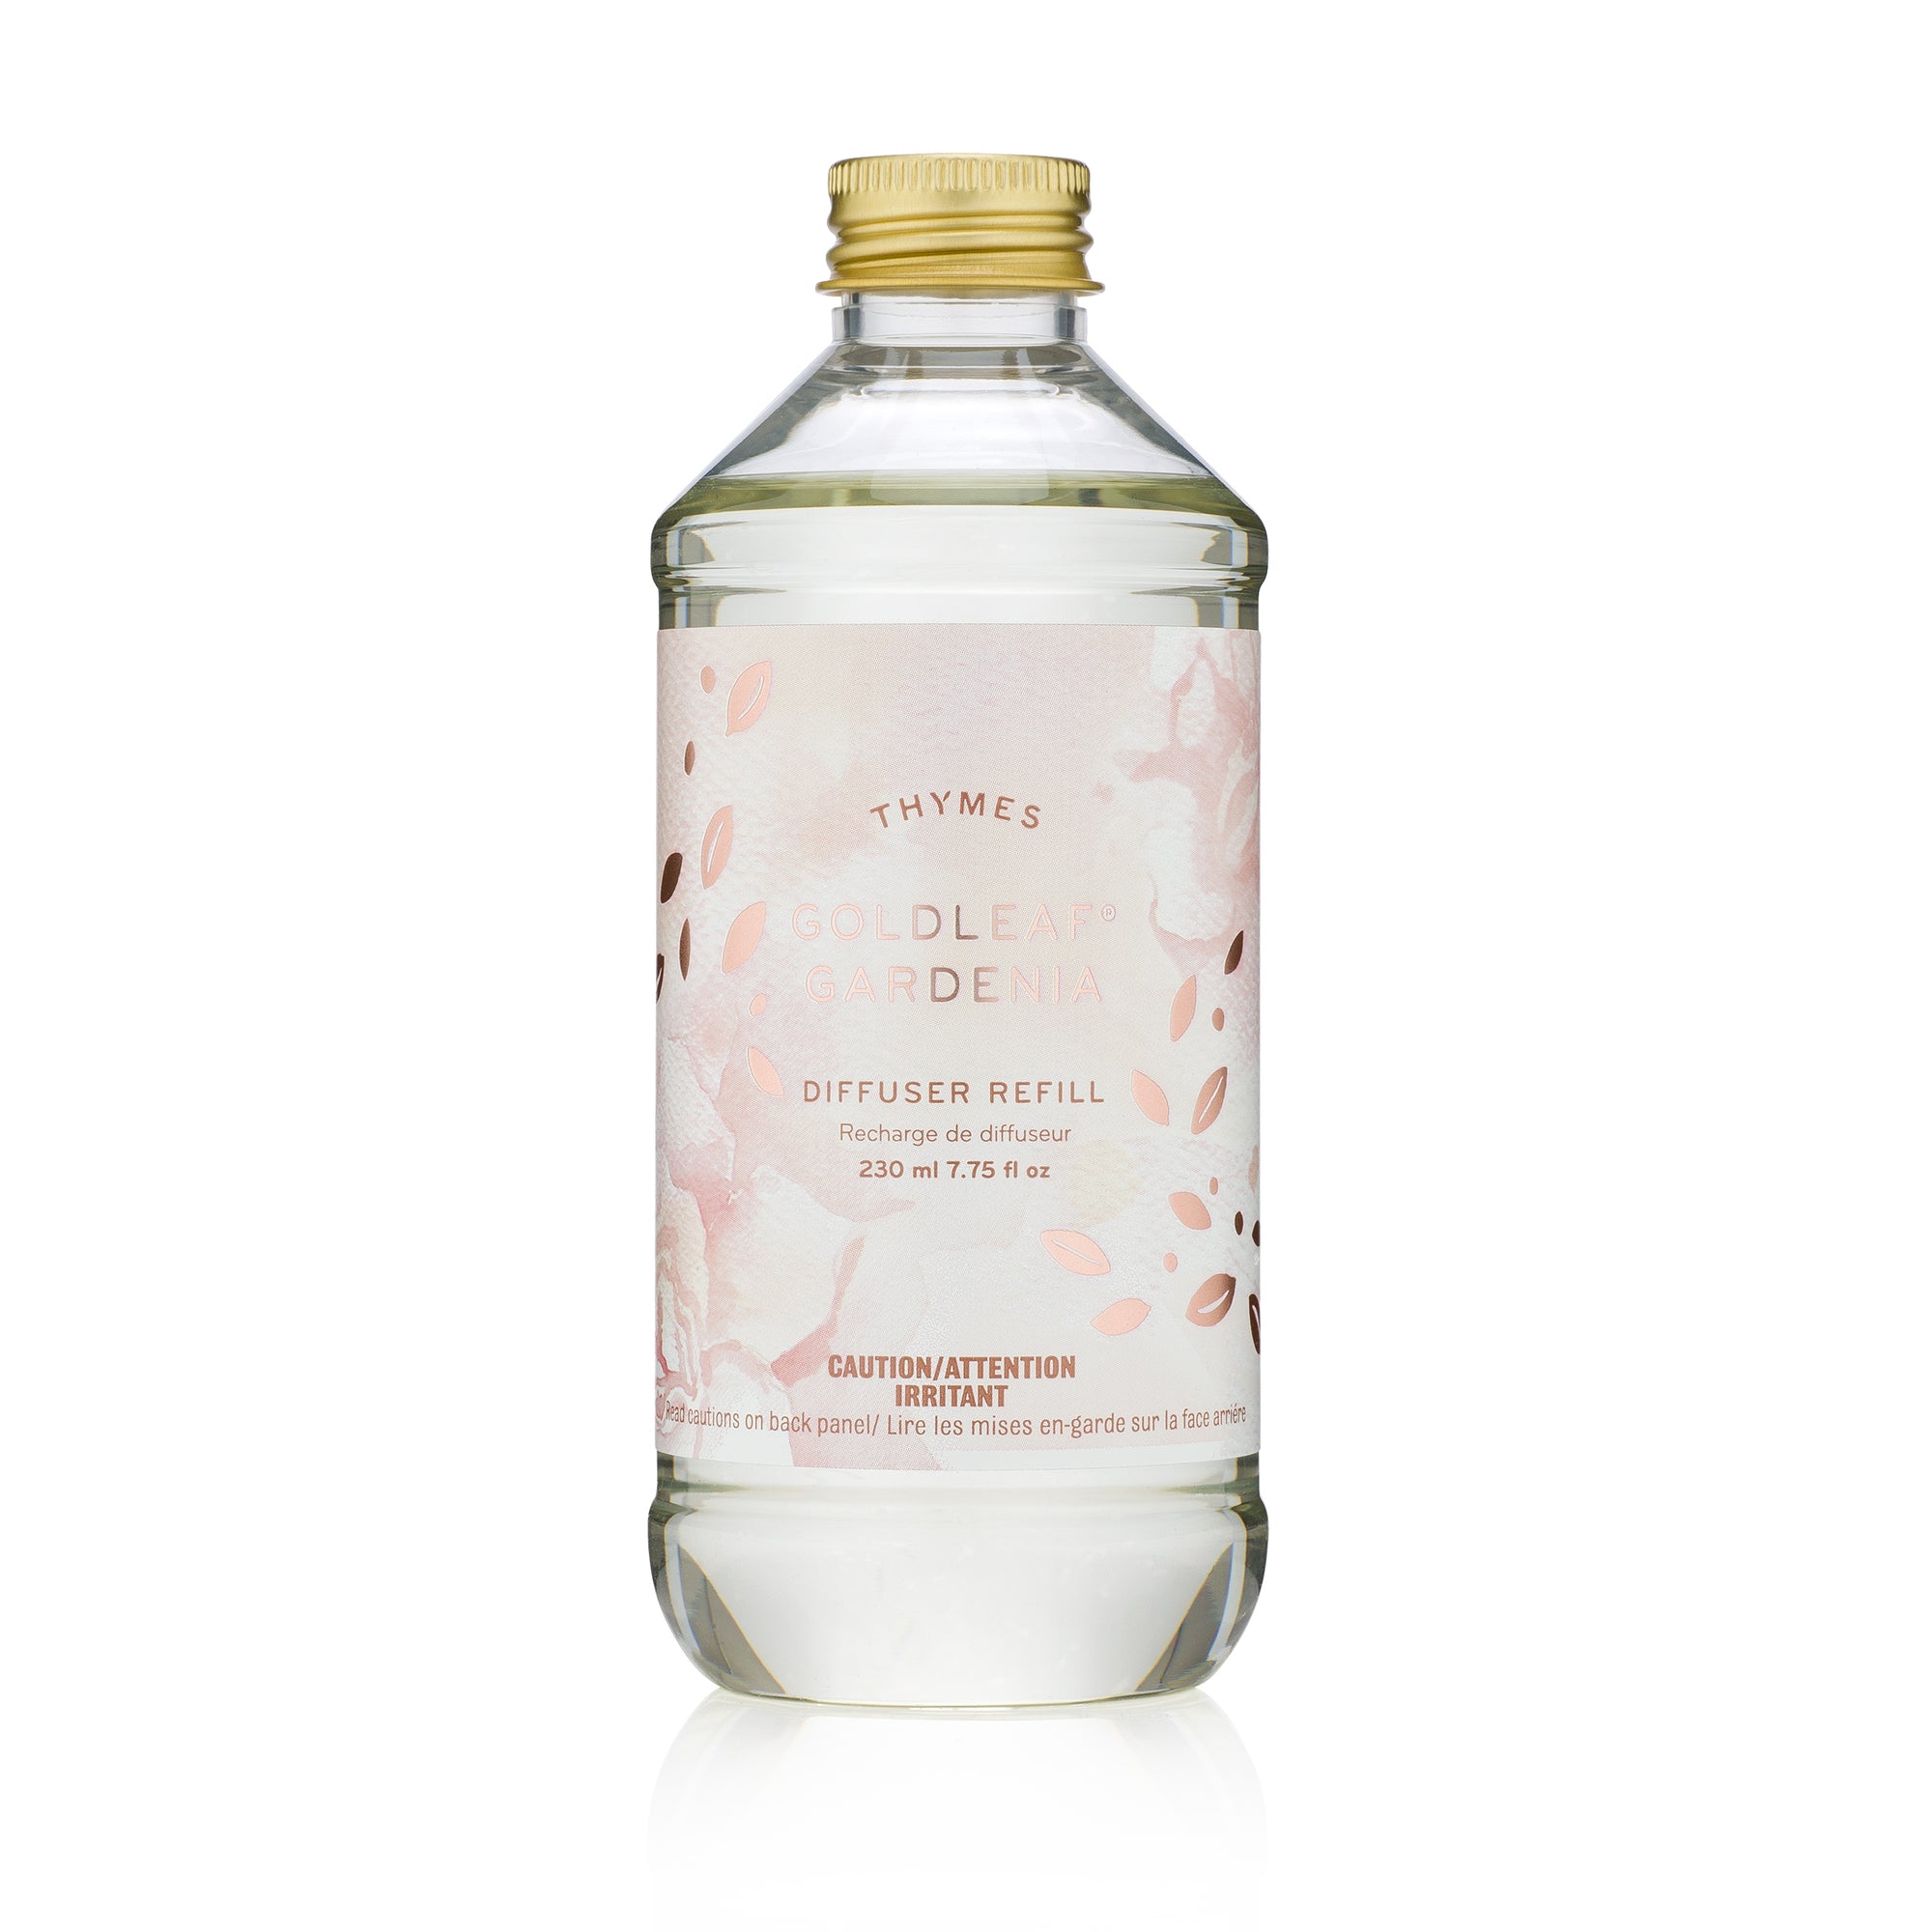 Thymes Diffuser Refill